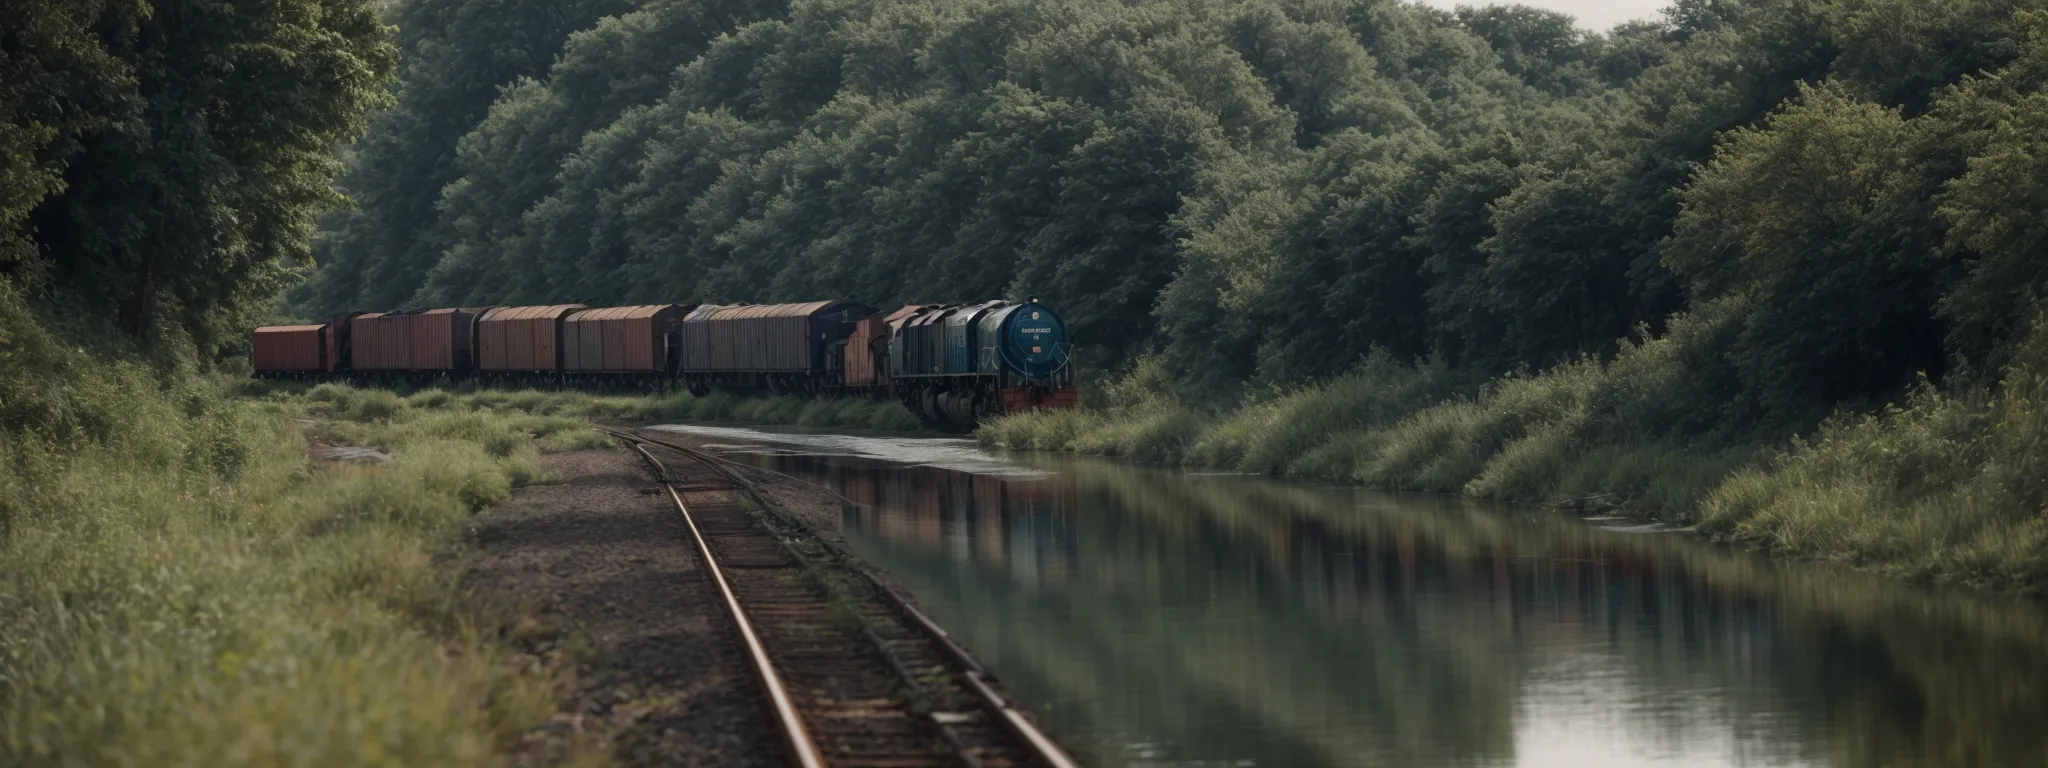 a freight train glides beside a tranquil canal, illustrating the synergy of rail and waterway transport.